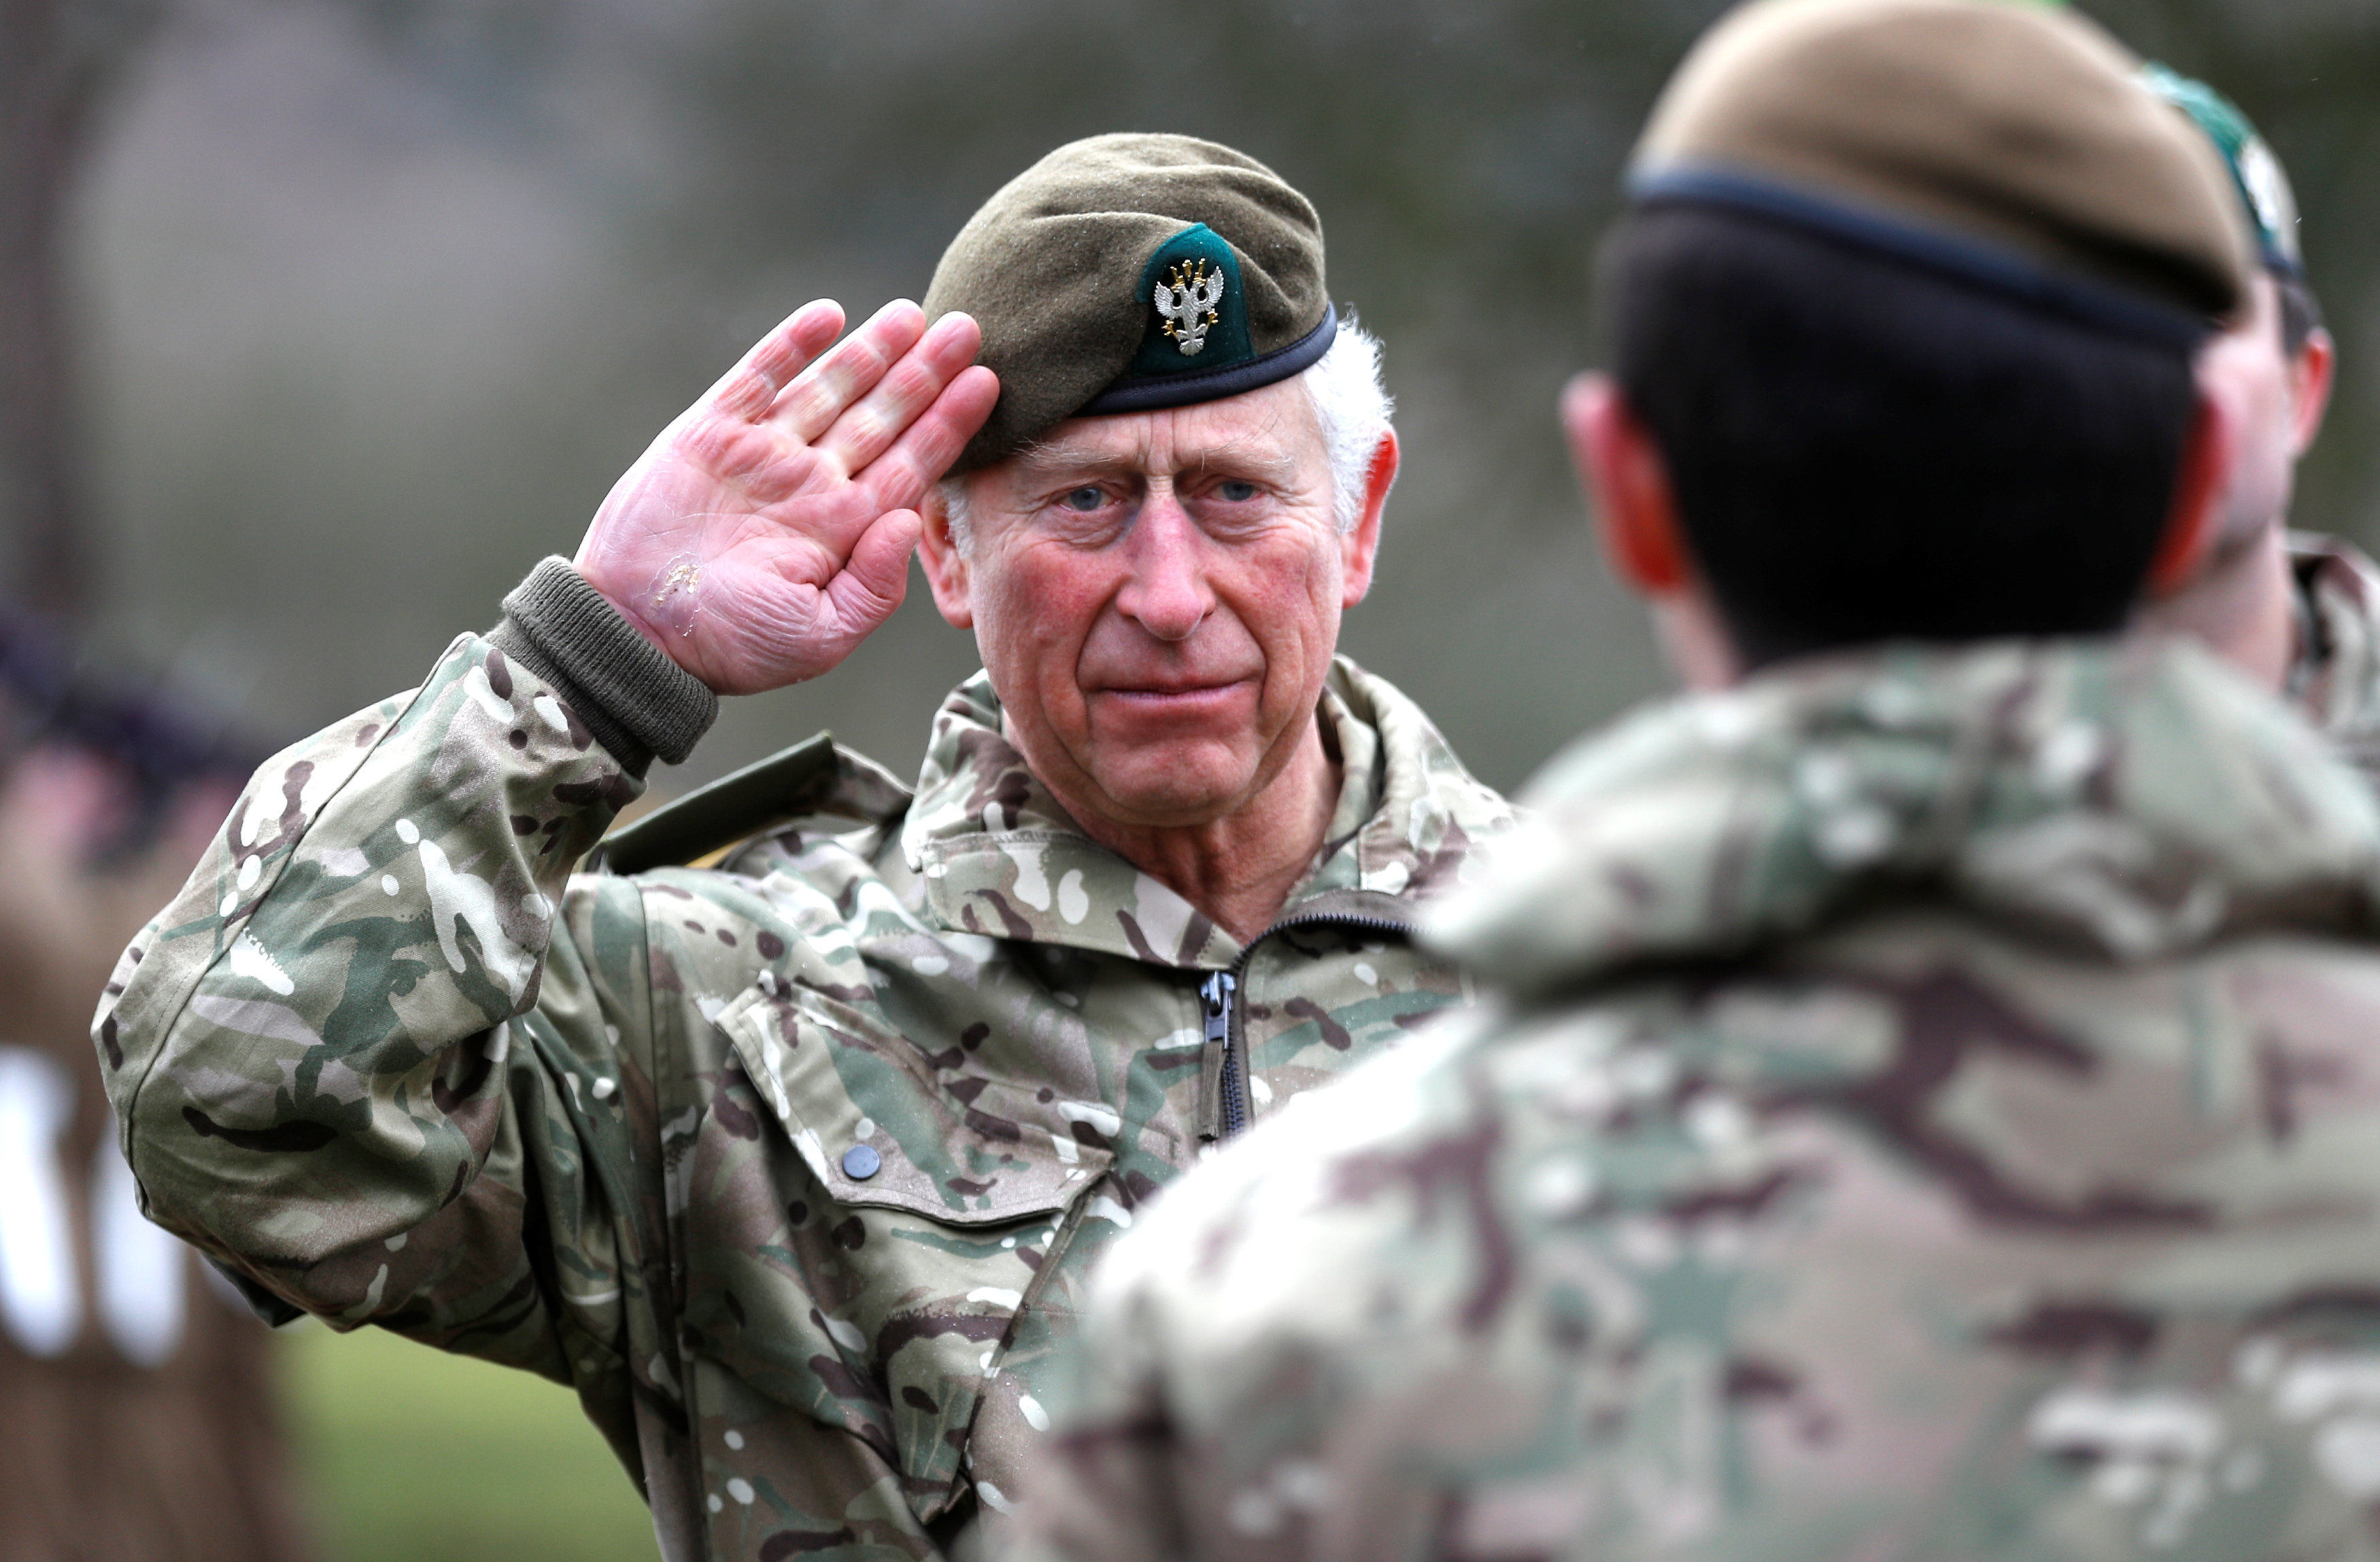 The Prince of Wales inspects troops during his visit to the 1st Battalion the Mercian Regiment 